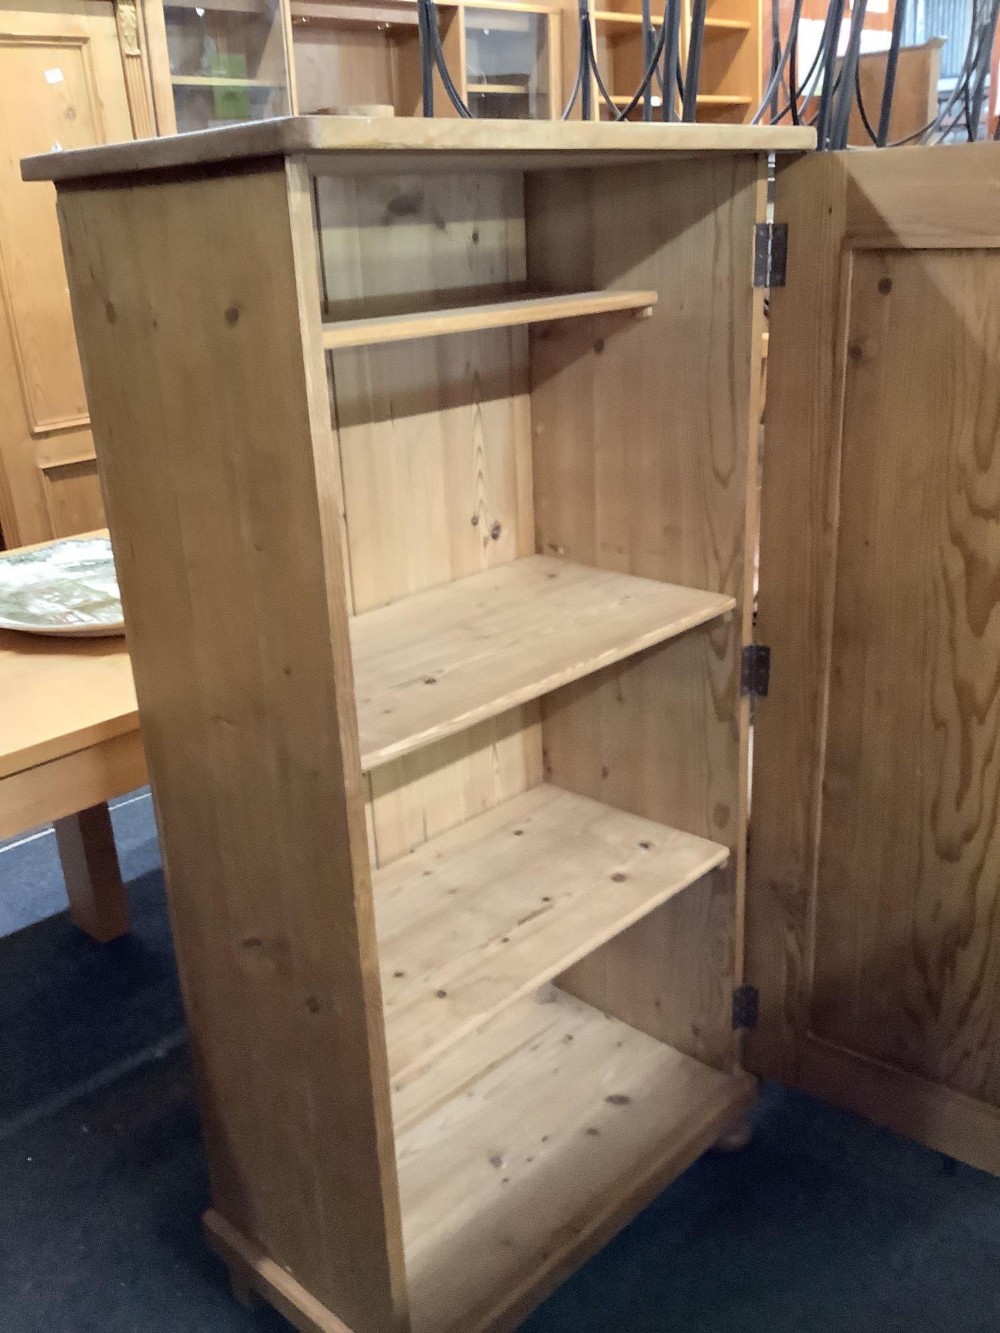 STRIPPED PINE KITCHEN CUPBOARD WITH 4 SHELVES, 27.5" WIDE X 16" DEEP X 52. - Image 2 of 2